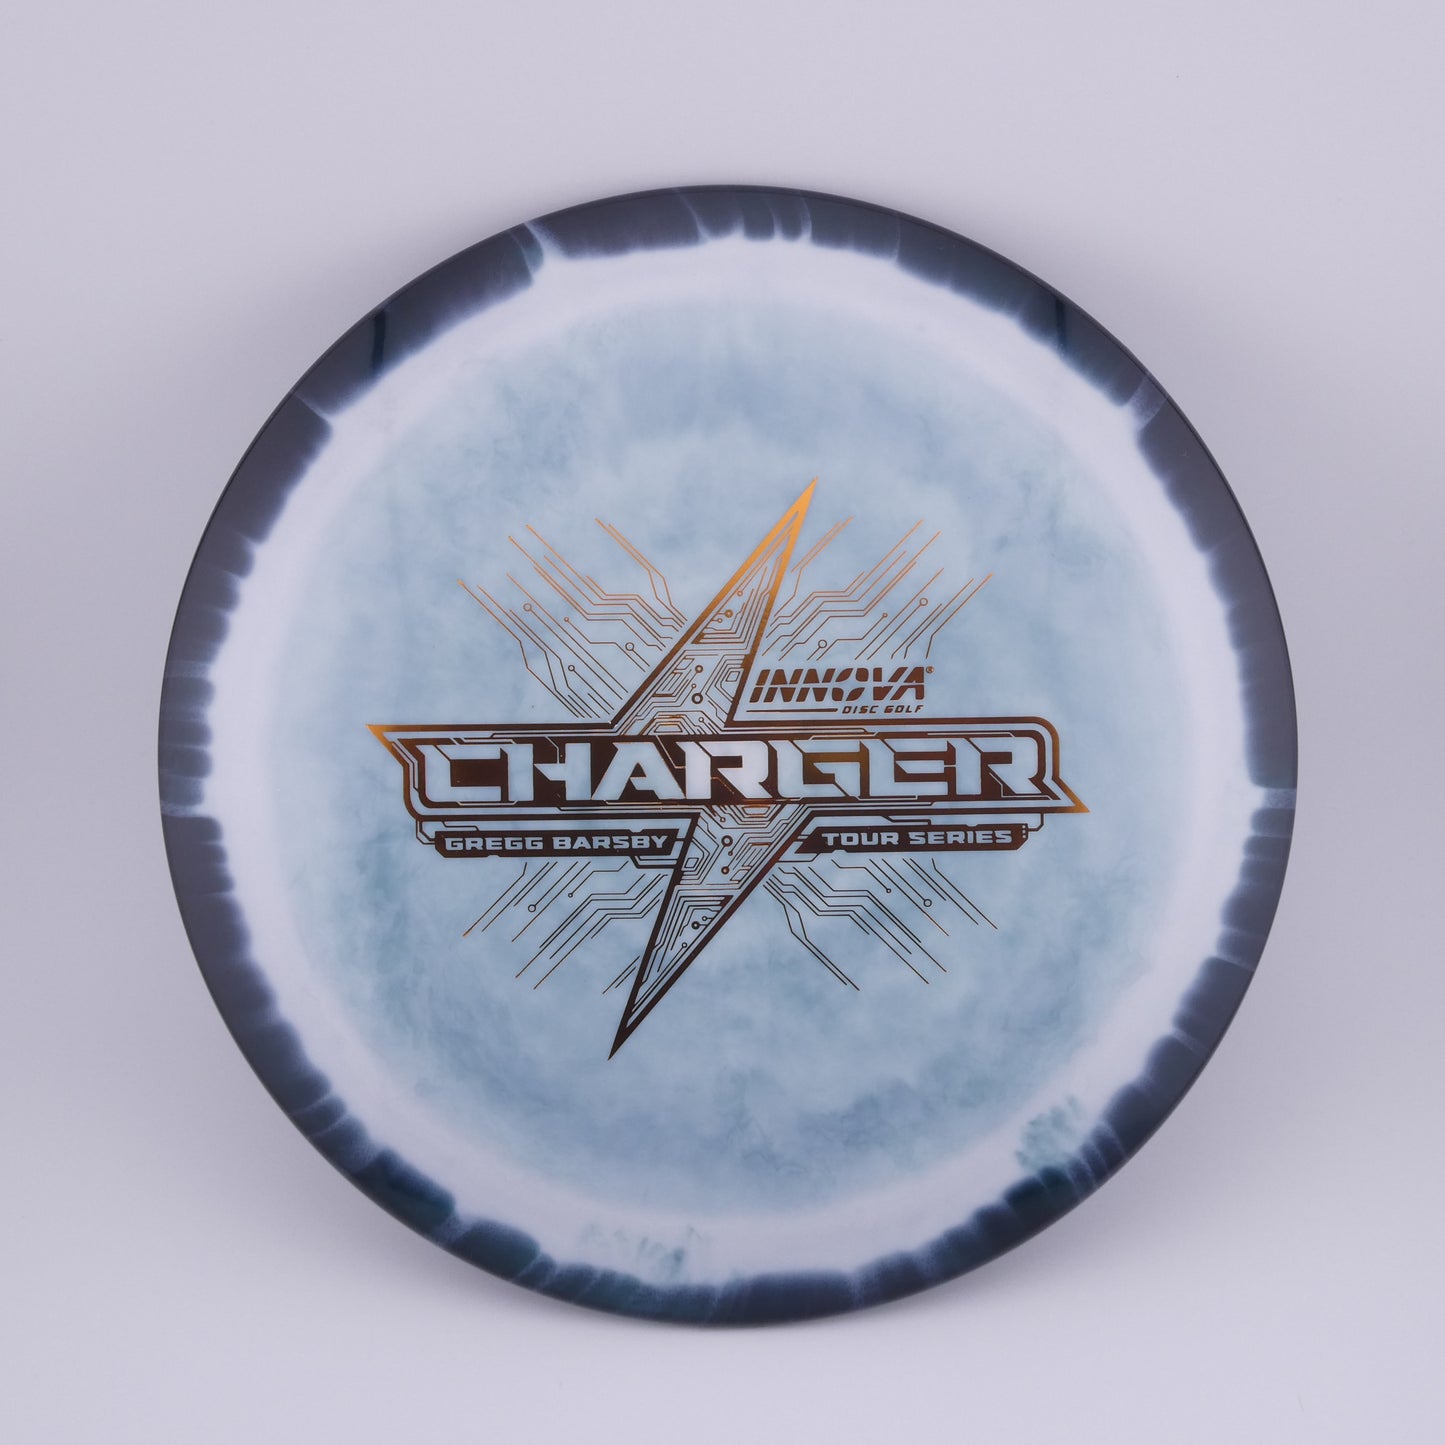 Halo Star Charger - Gregg Barsby 173-175g